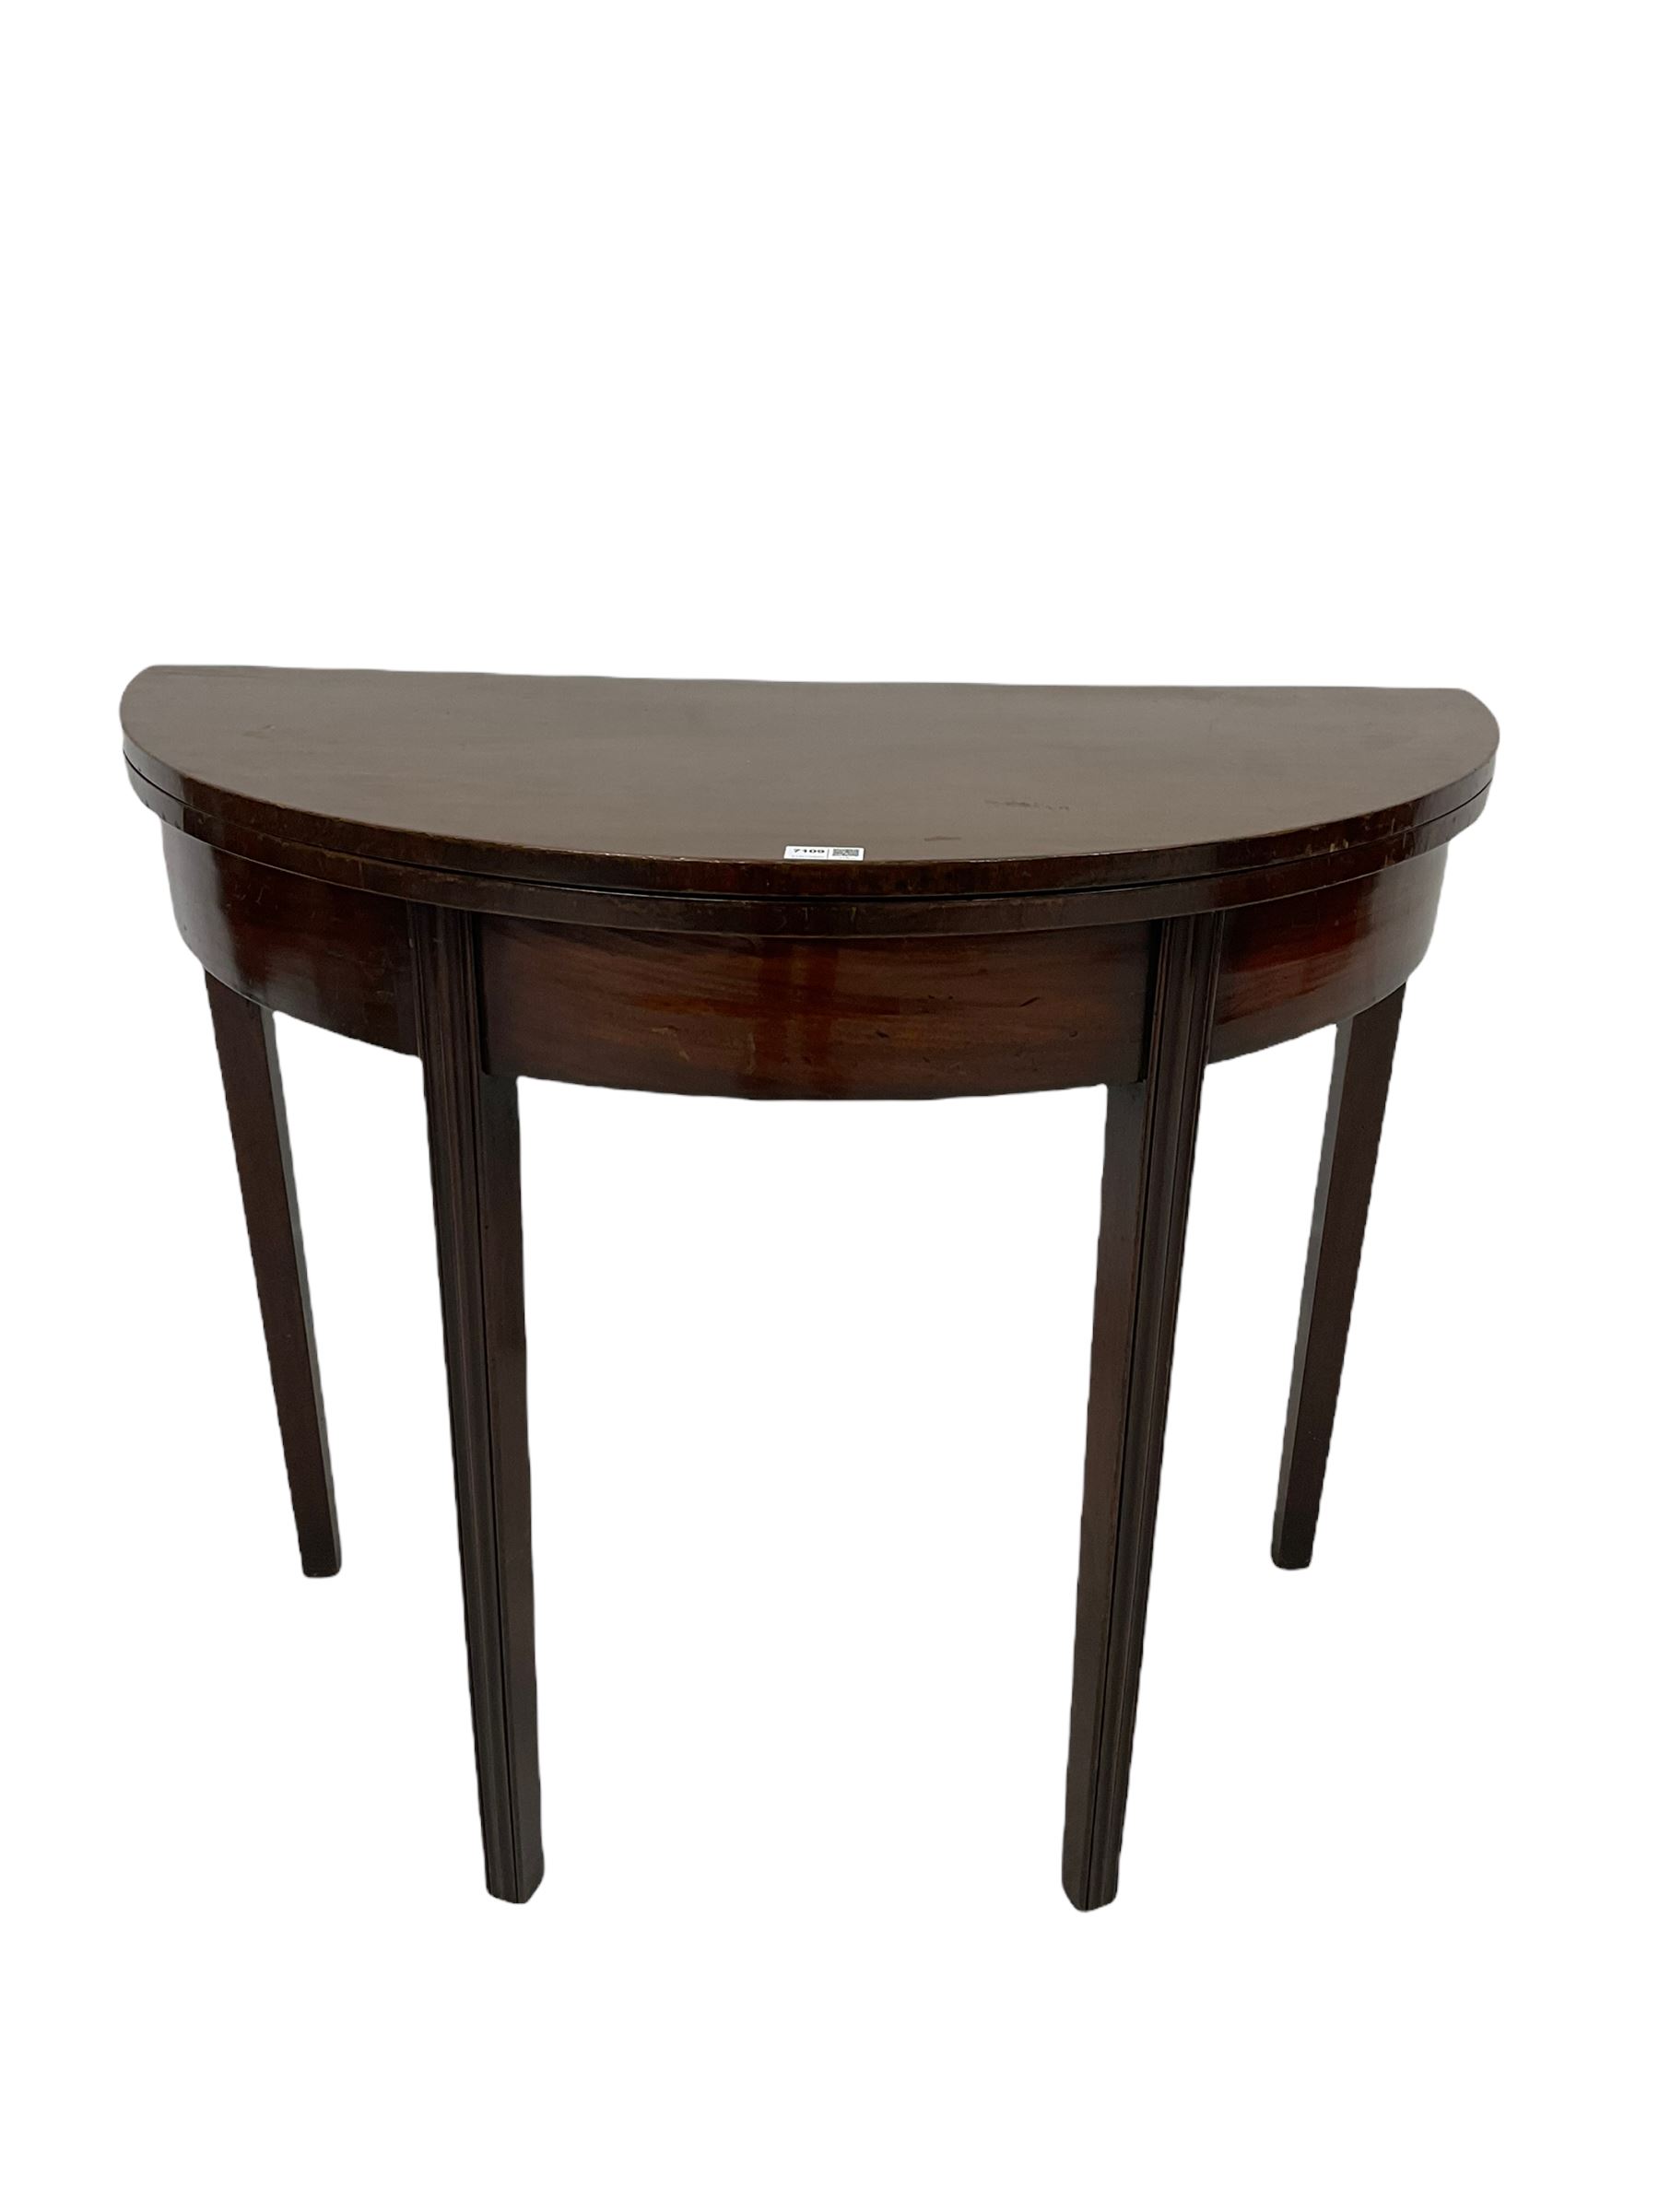 DS Georgian style demi lune mahogany table, the fold over top raised on ...